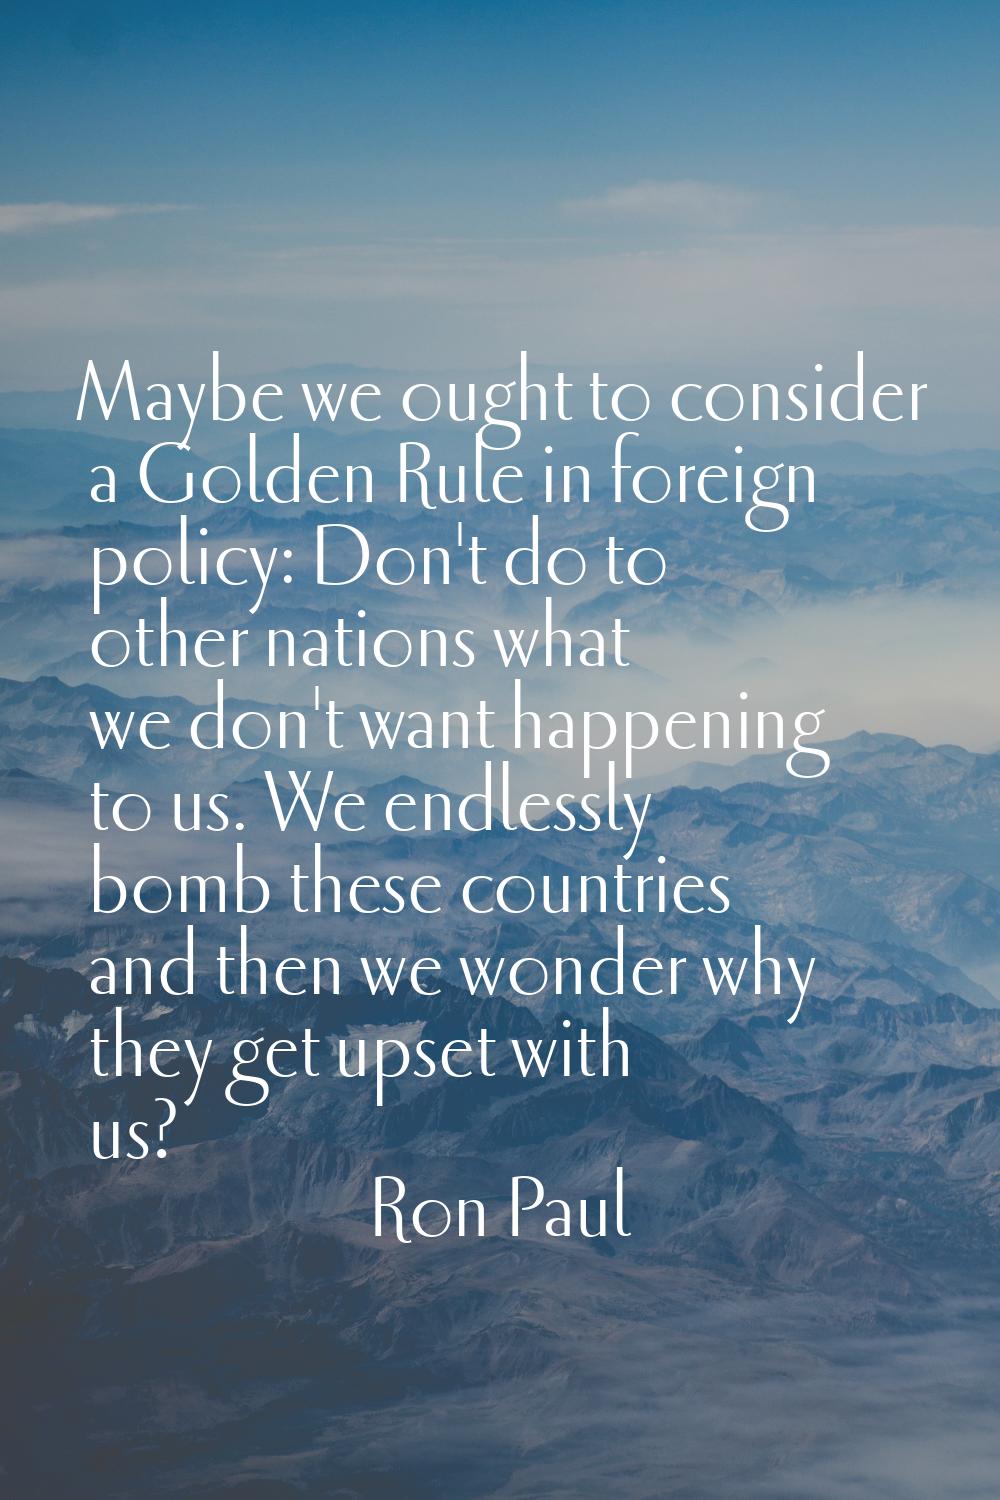 Maybe we ought to consider a Golden Rule in foreign policy: Don't do to other nations what we don't